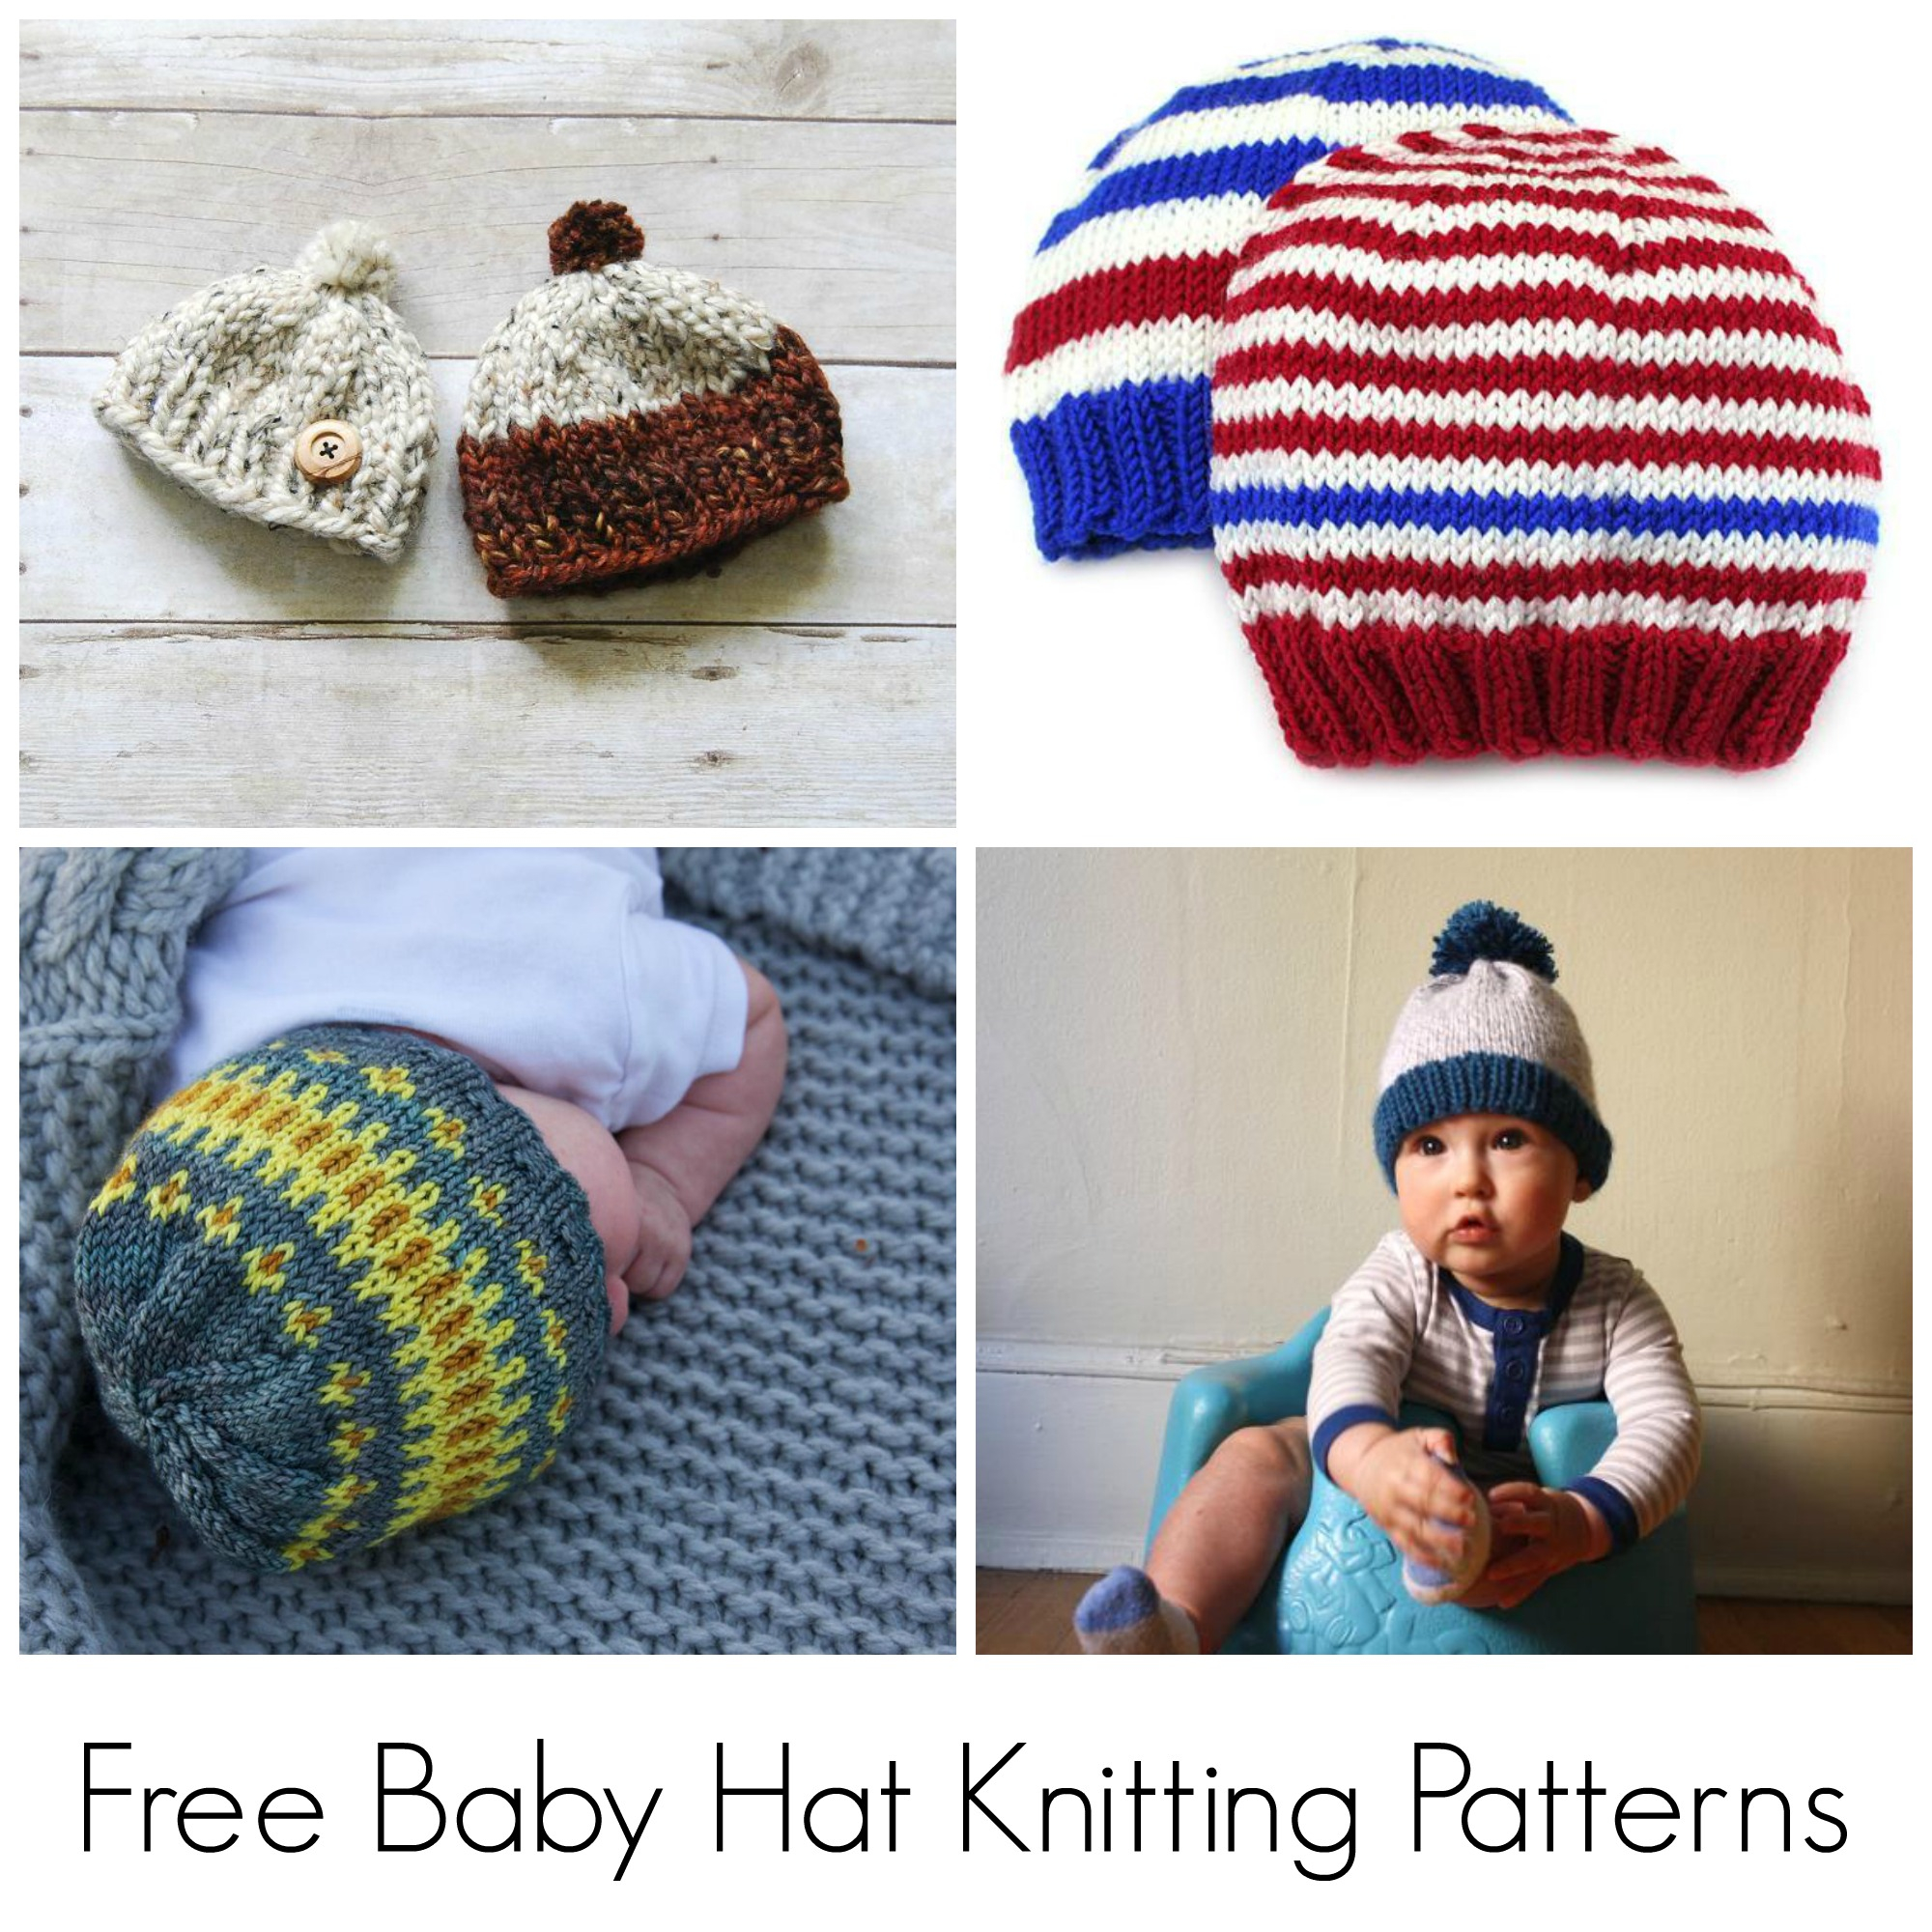 Trendy Baby Knitting Patterns 10 Free Knitting Patterns For Ba Hats On Craftsy